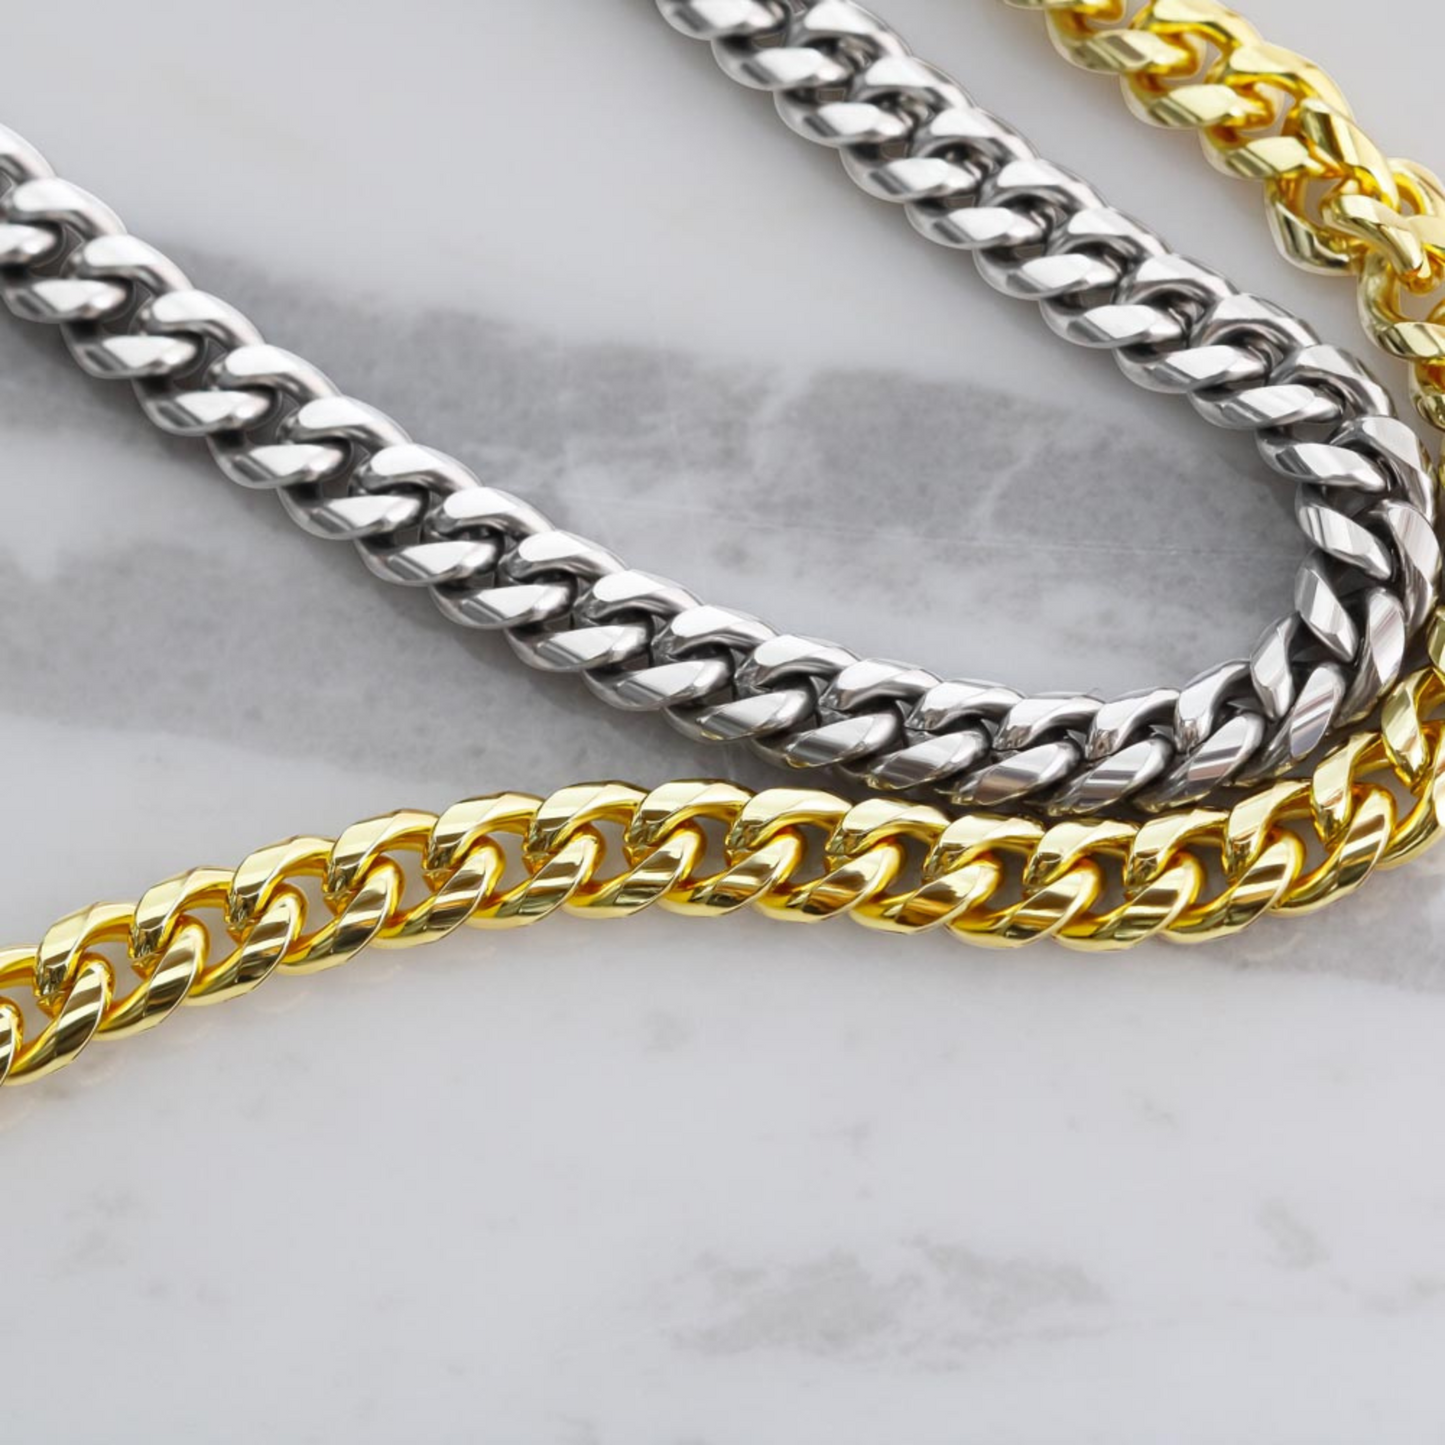 Personalized To My Boyfriend Cuban Link Chain 5mm Necklace - Merry Christmas #e192